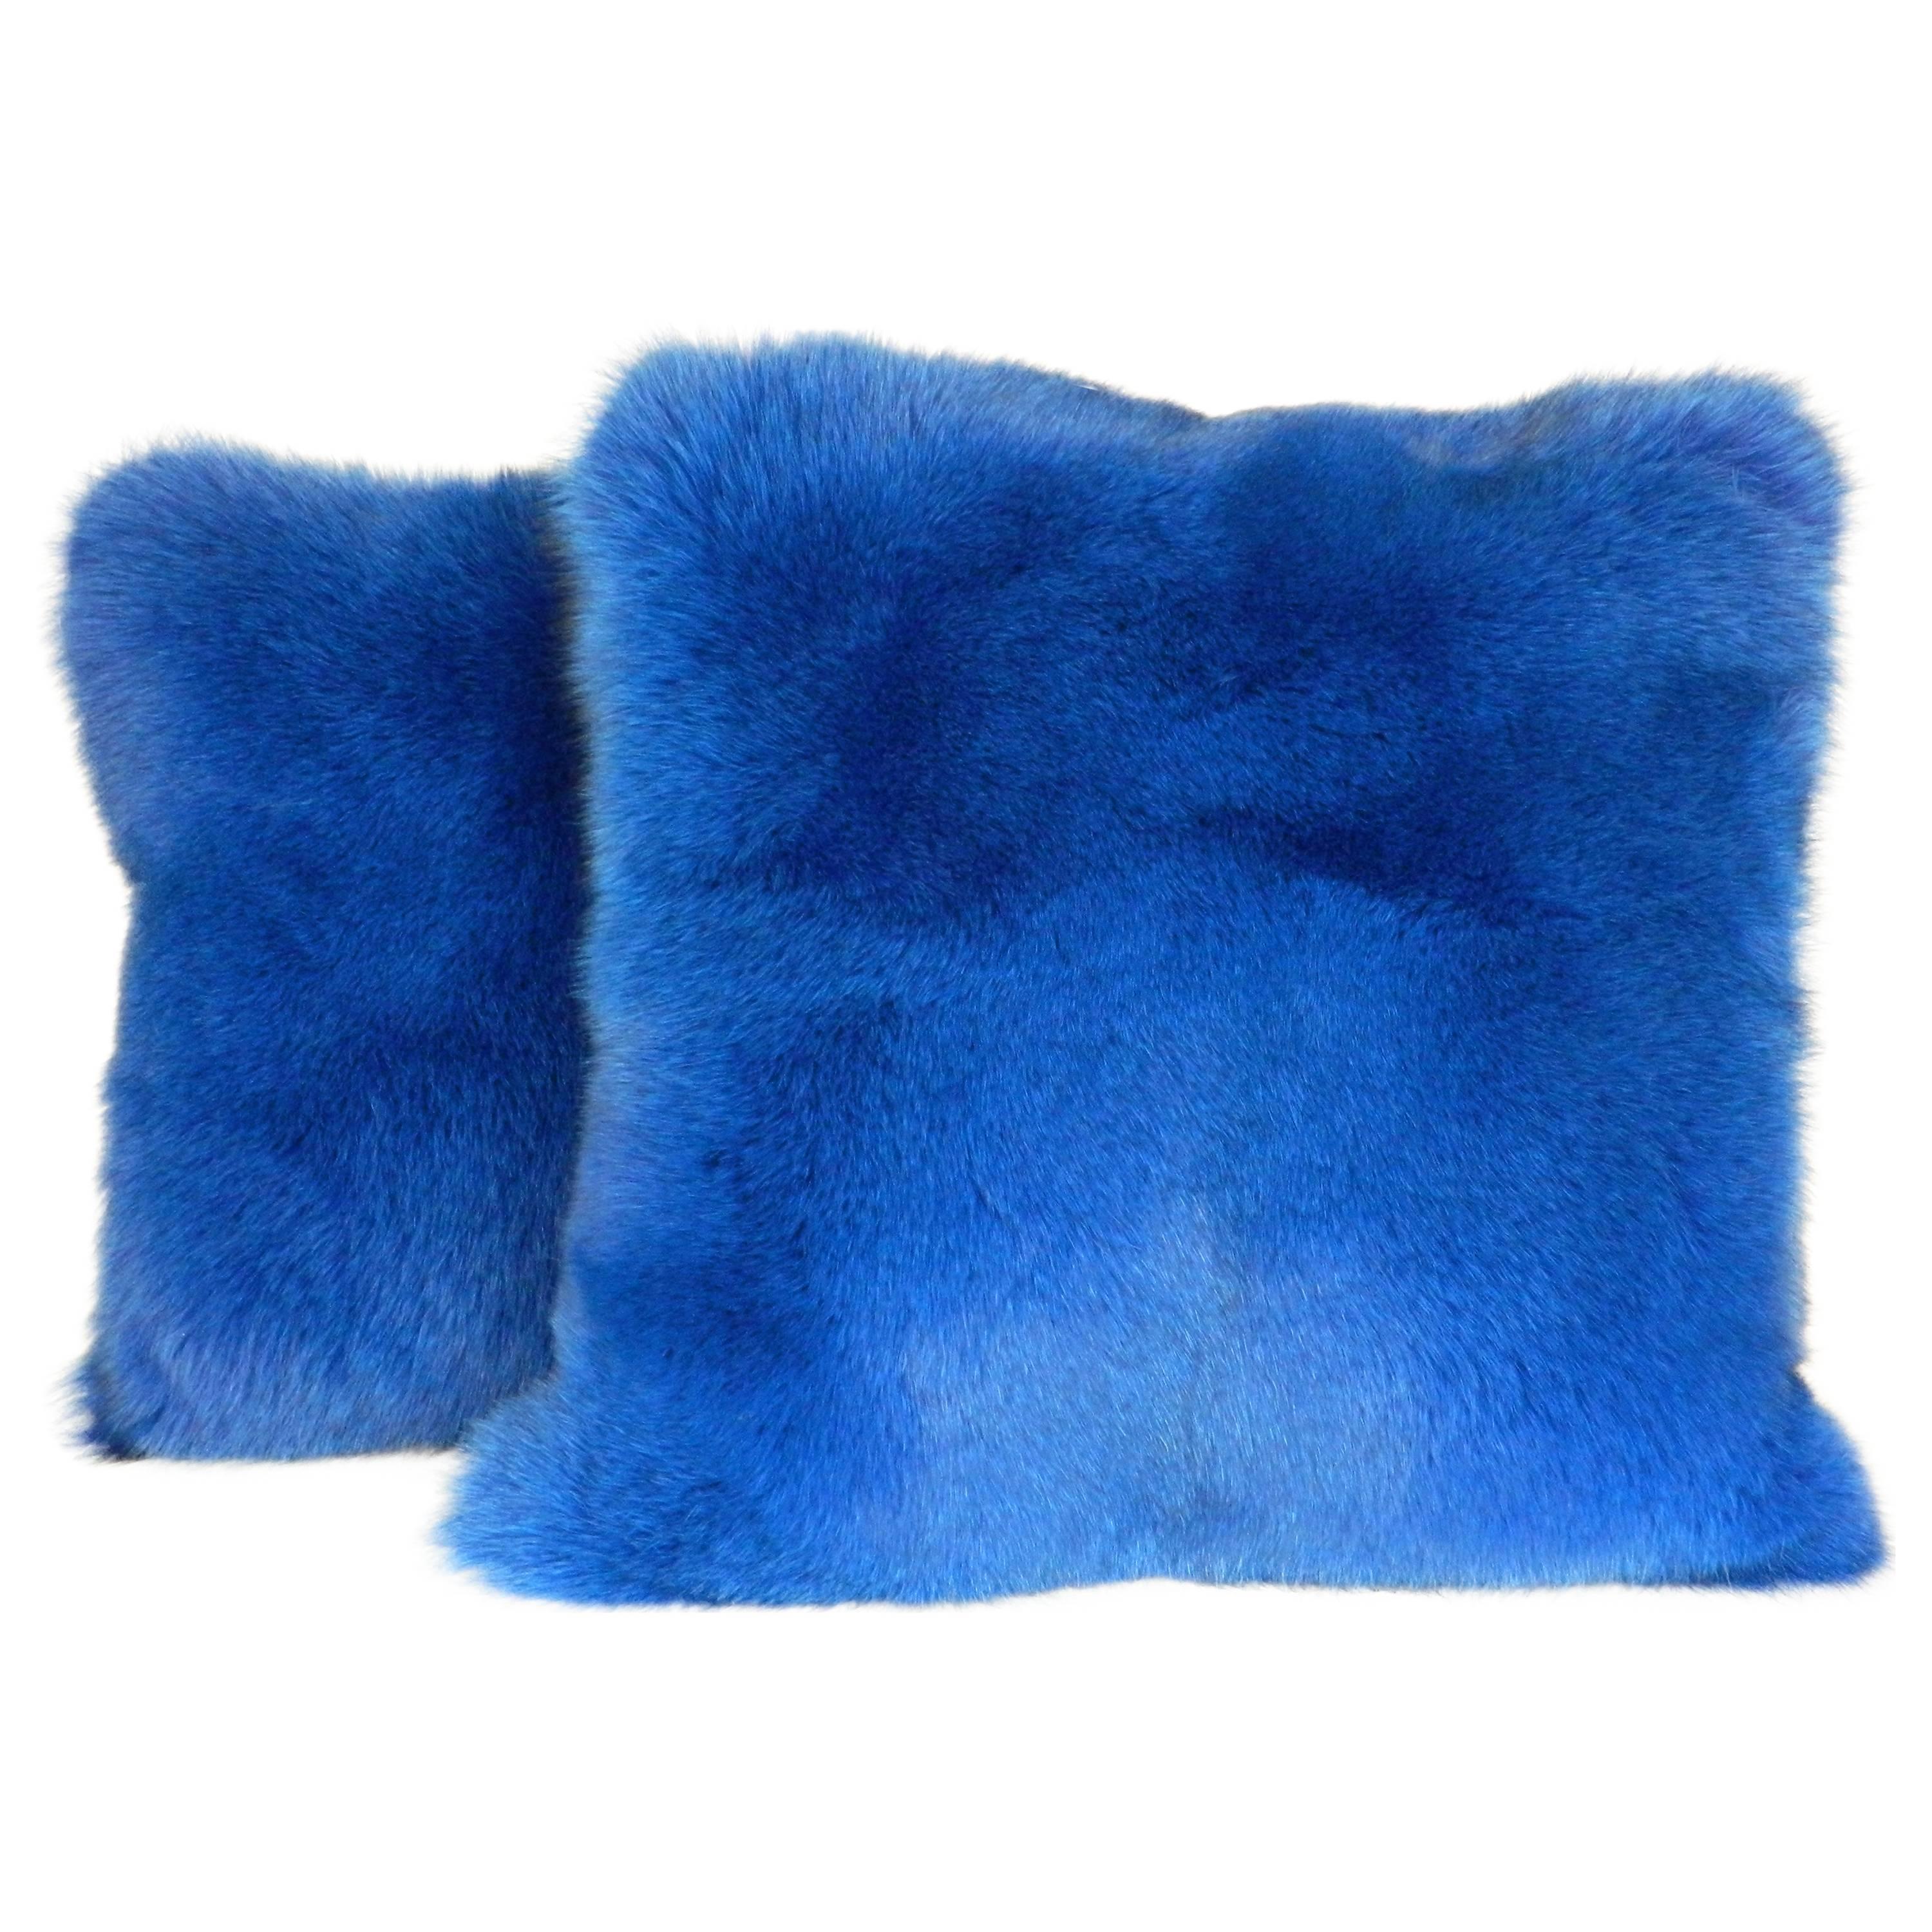  Exquisite Blue Fox Pillow with Italian Cashmere  For Sale